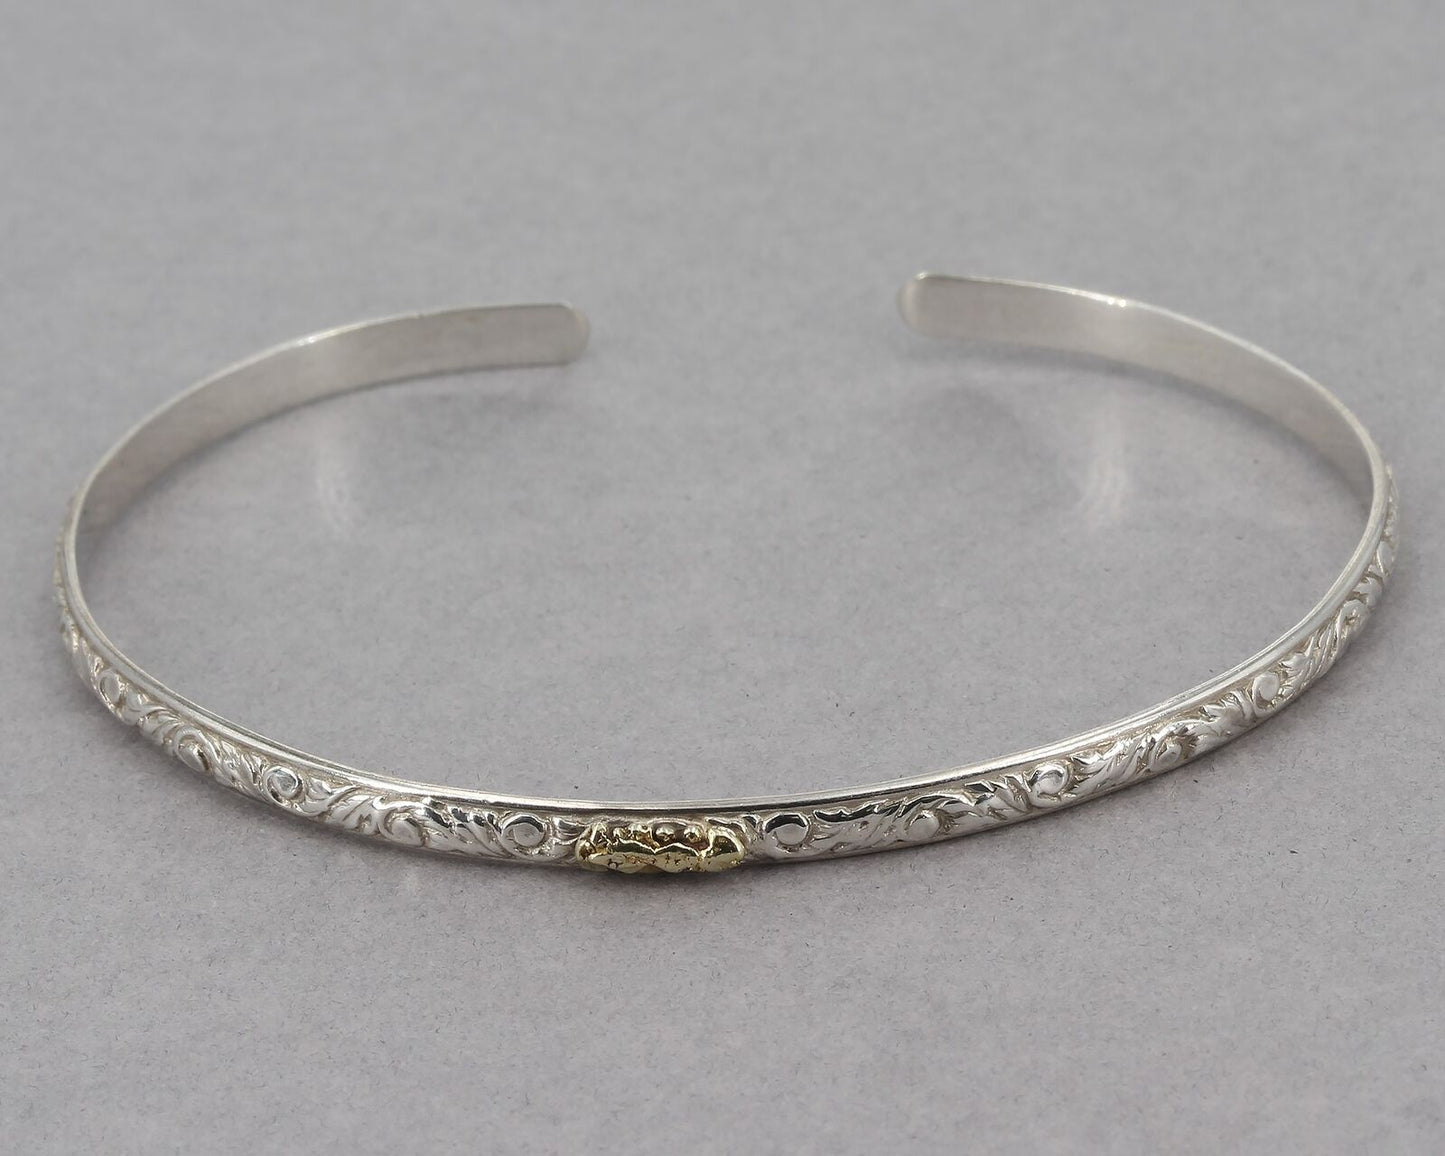 Thin Dainty Vintage Sterling Acanthus Scroll Cuff Bracelet w/ Gold Nugget Accent